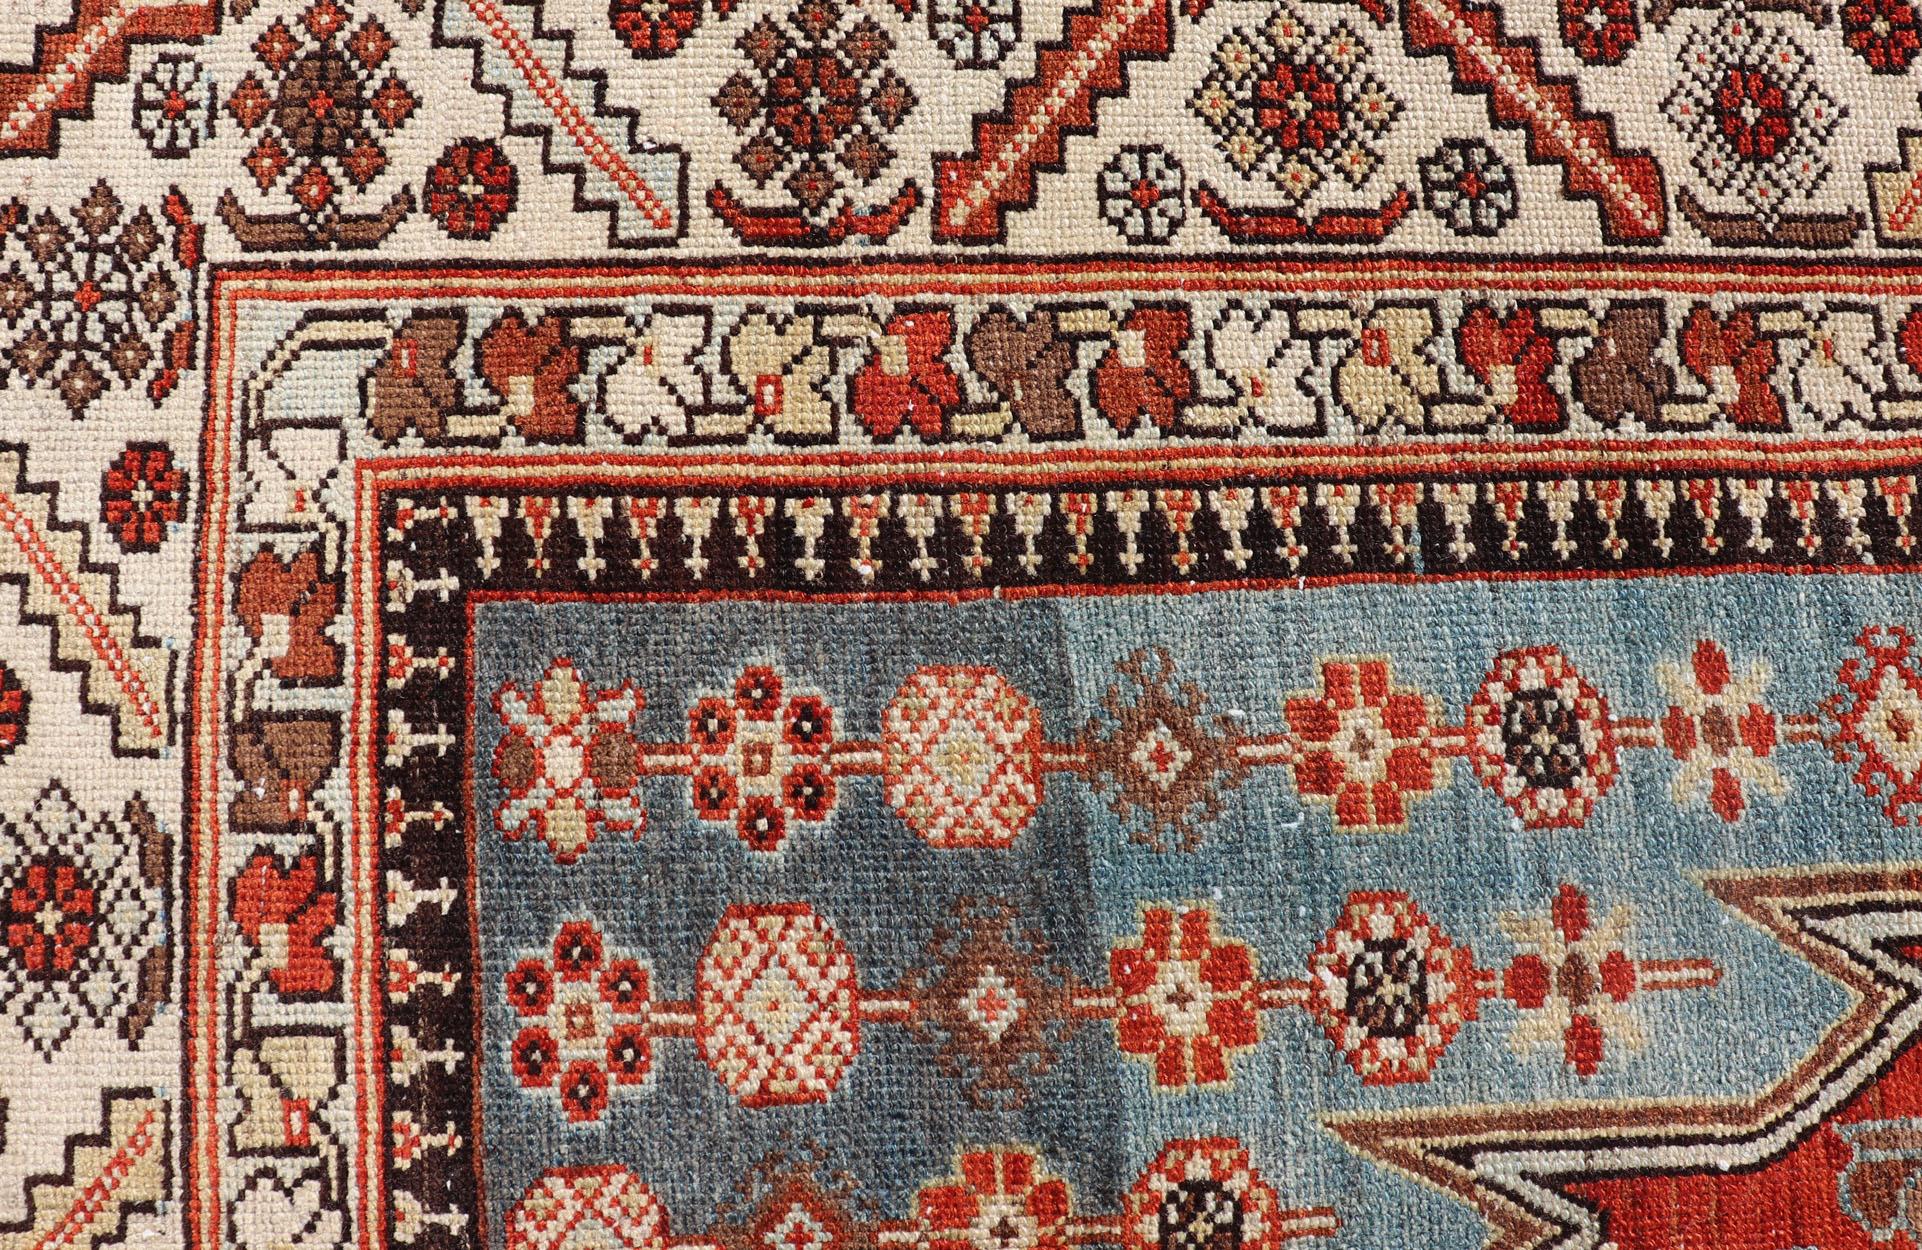 This unique Persian Hamadan Gallery rug features an exquisite design composed of a vertical arrangement of red and brown geometric medallions surrounded by a variety of intricate motifs. The rug is set upon a Dark and Light Blue background, and is